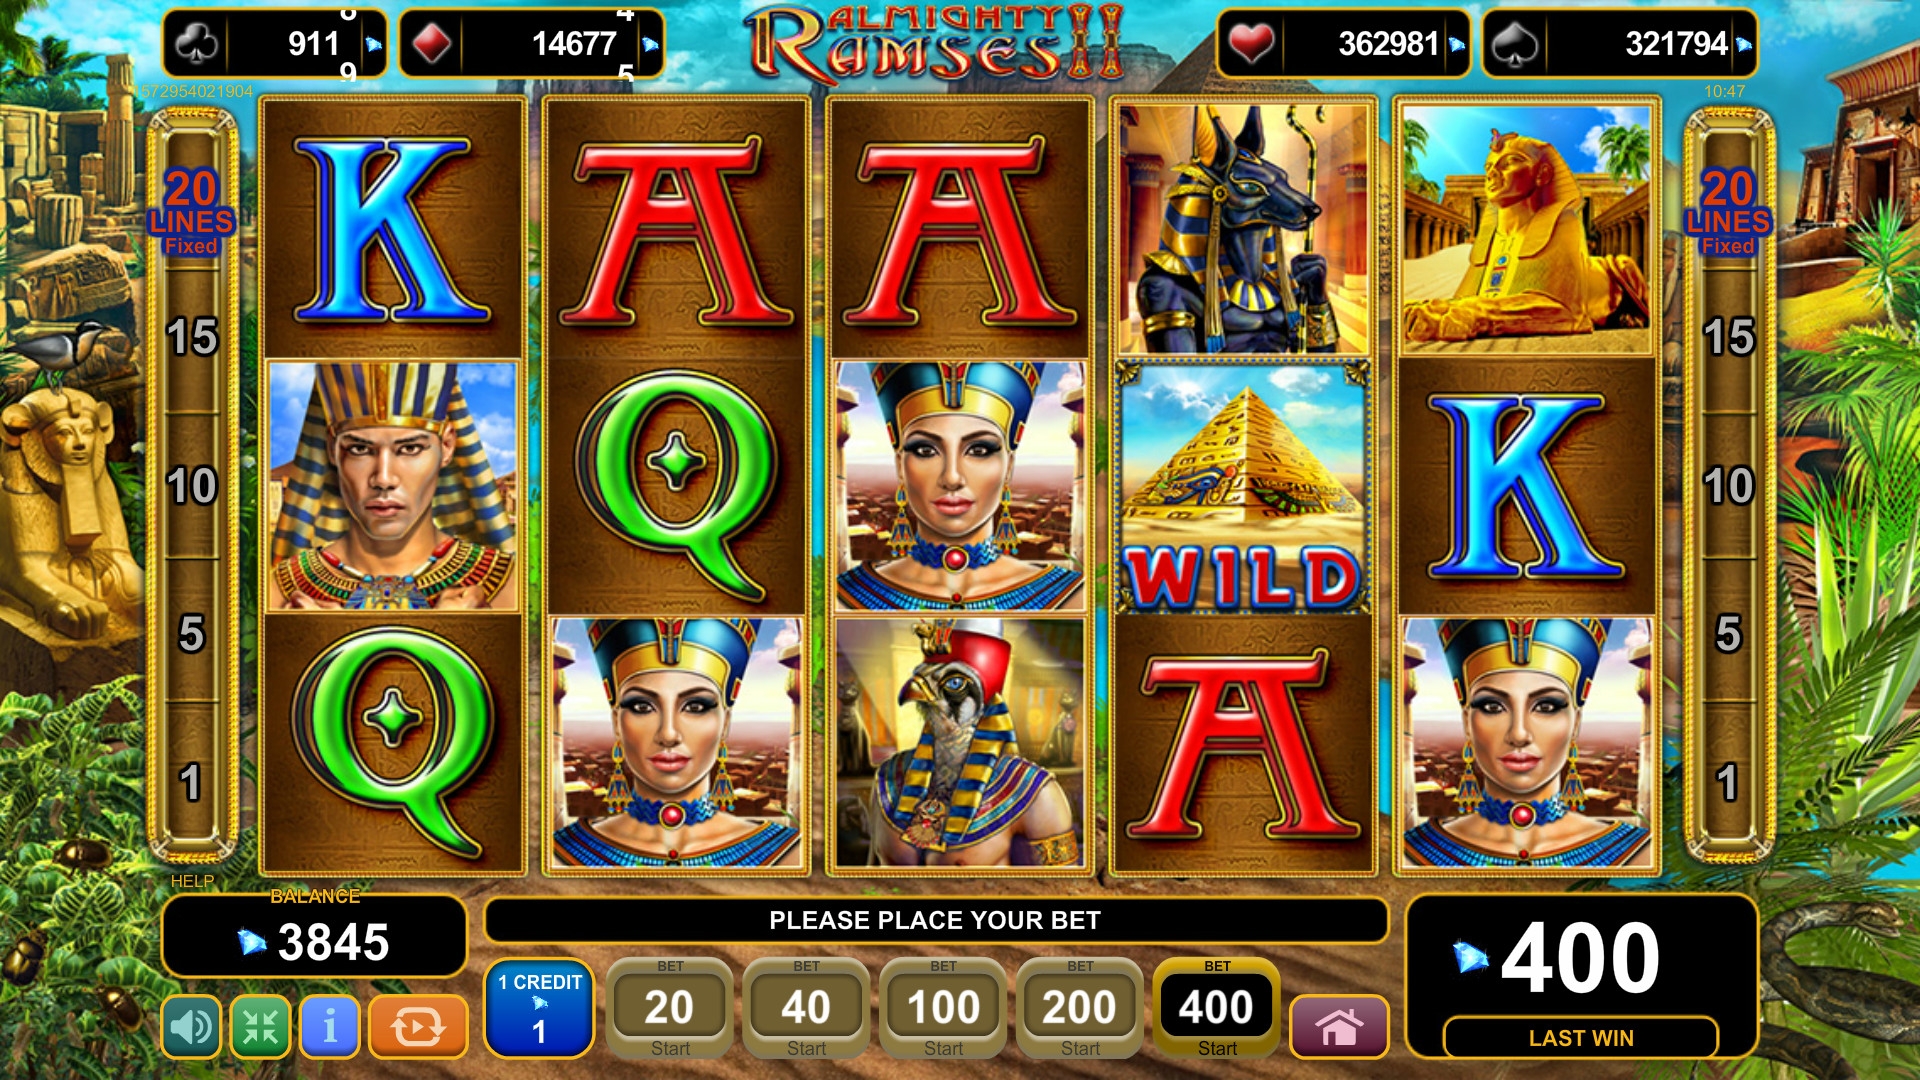 Almighty Ramses II (Almighty Ramses II) from category Slots